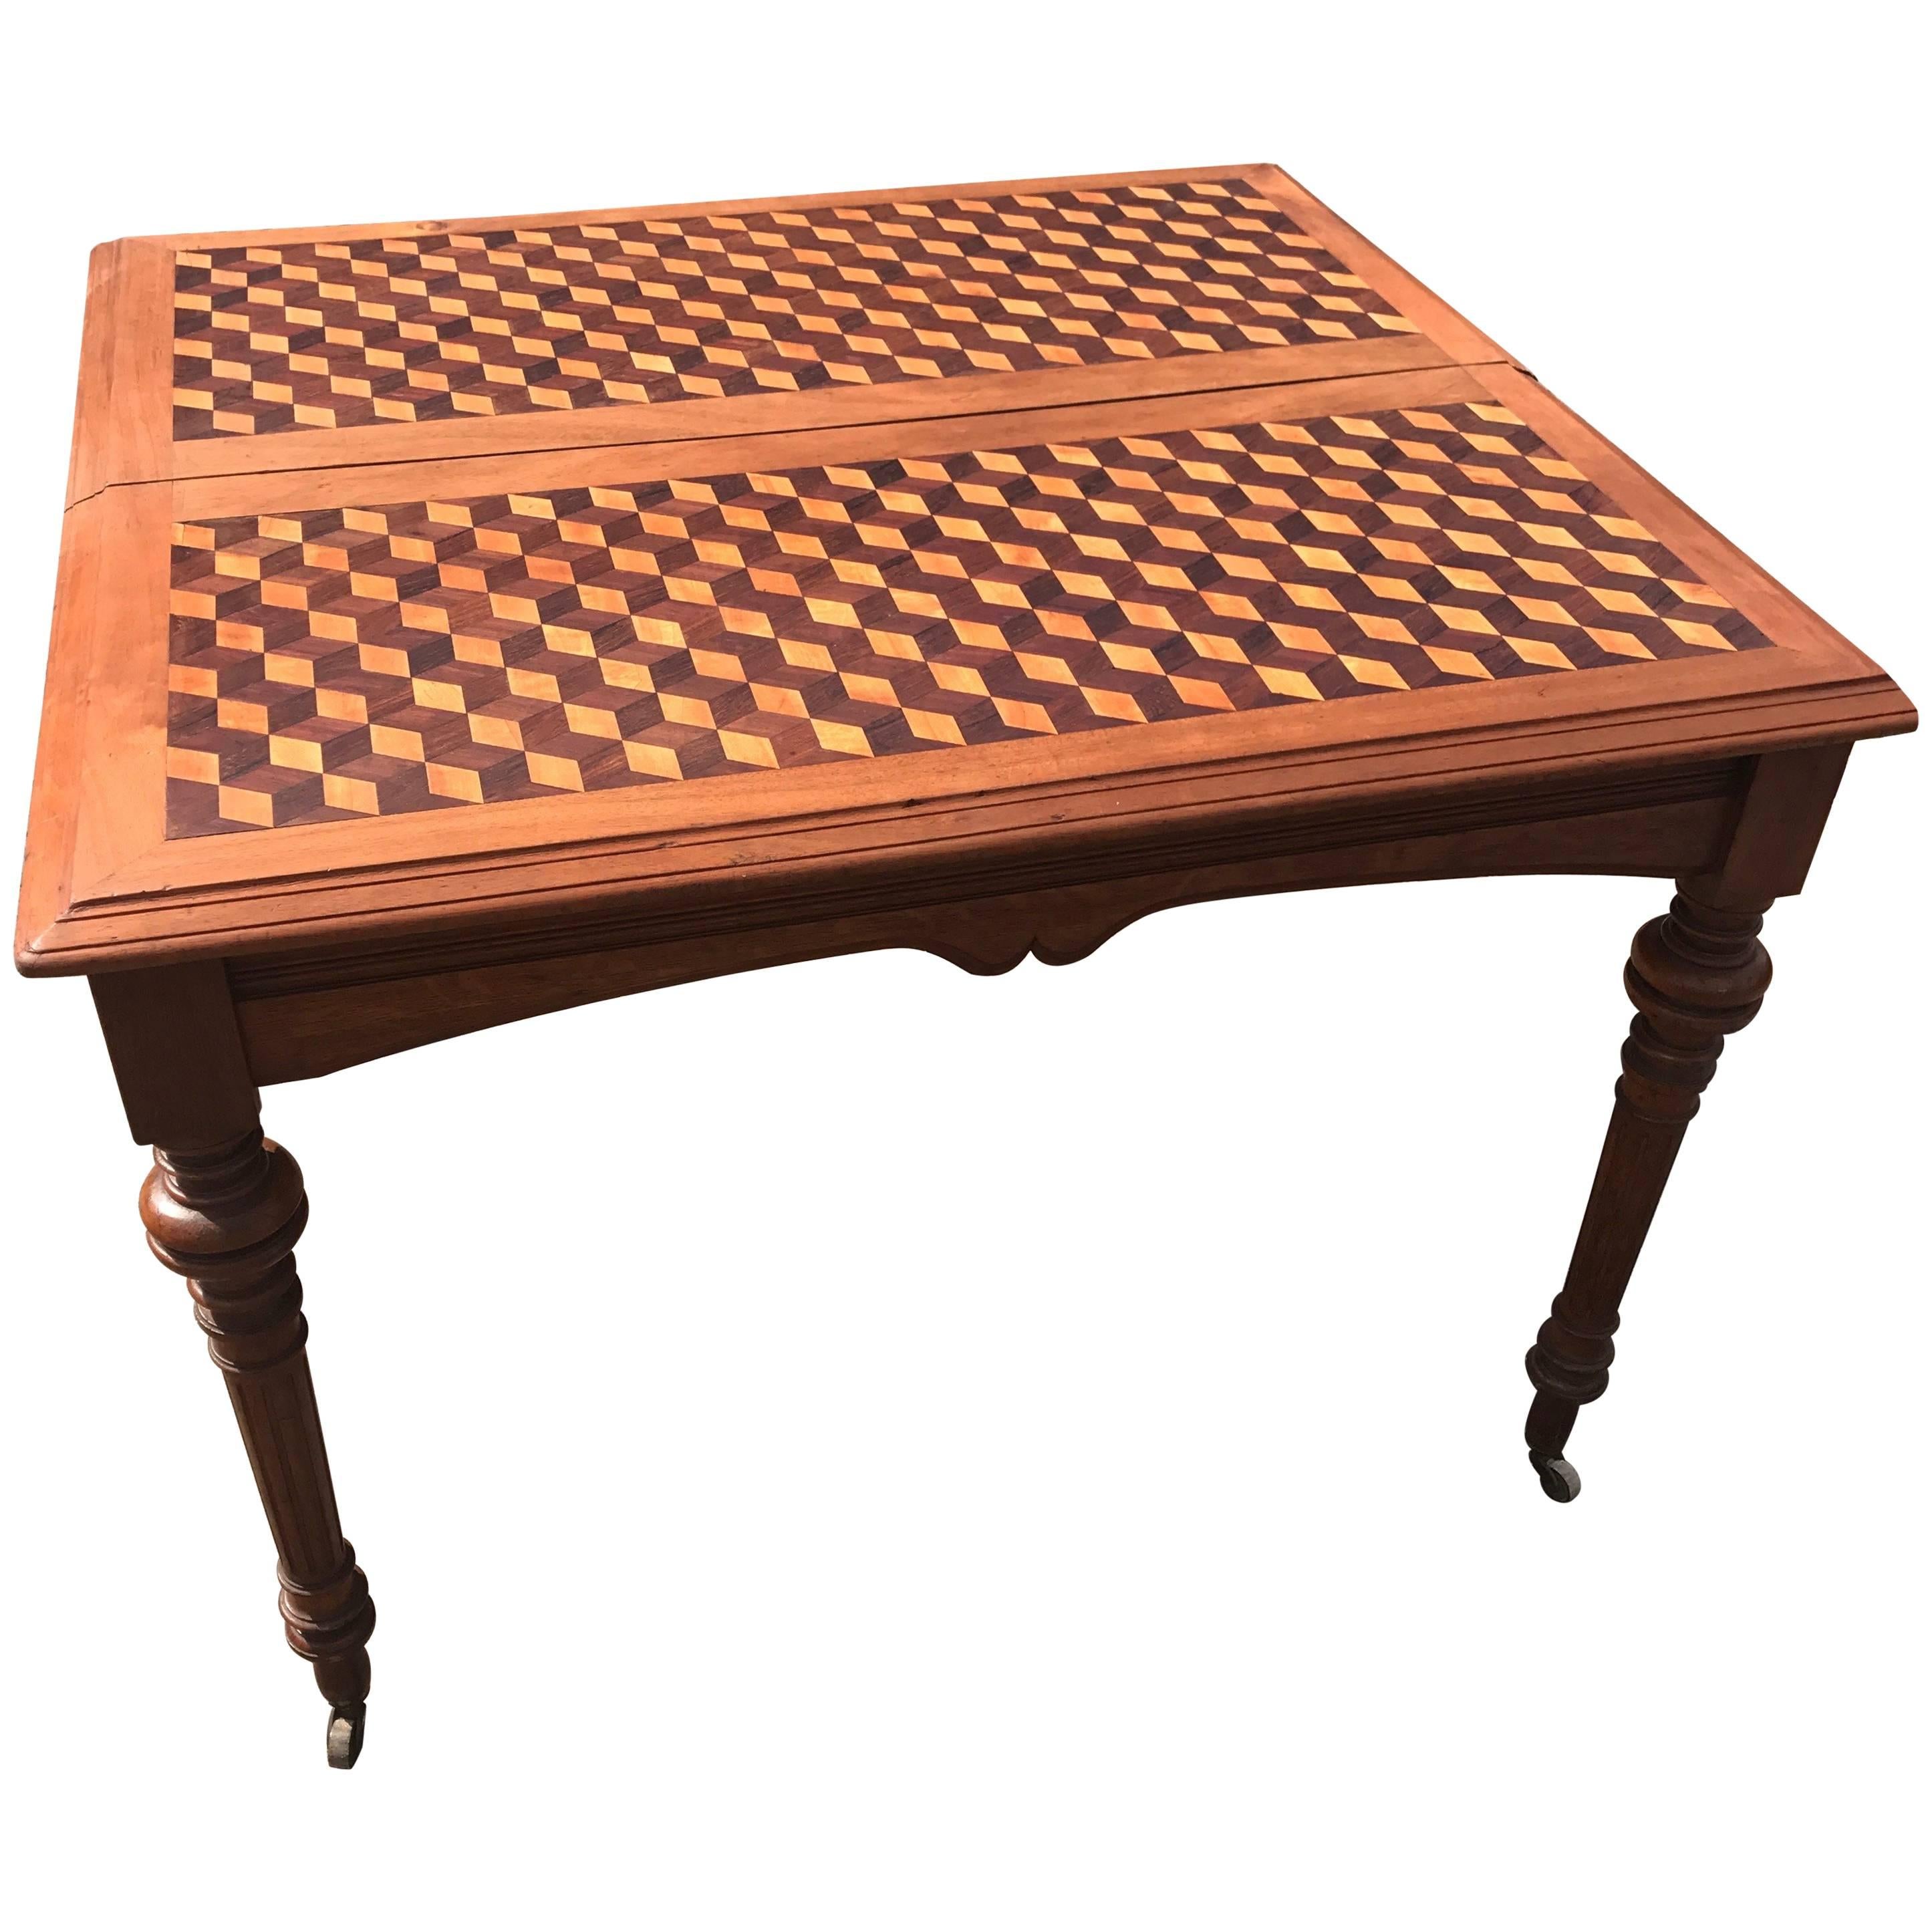 Stunning Antique Marquetry Inlaid Square Centre Table, French Nutwood on Casters For Sale